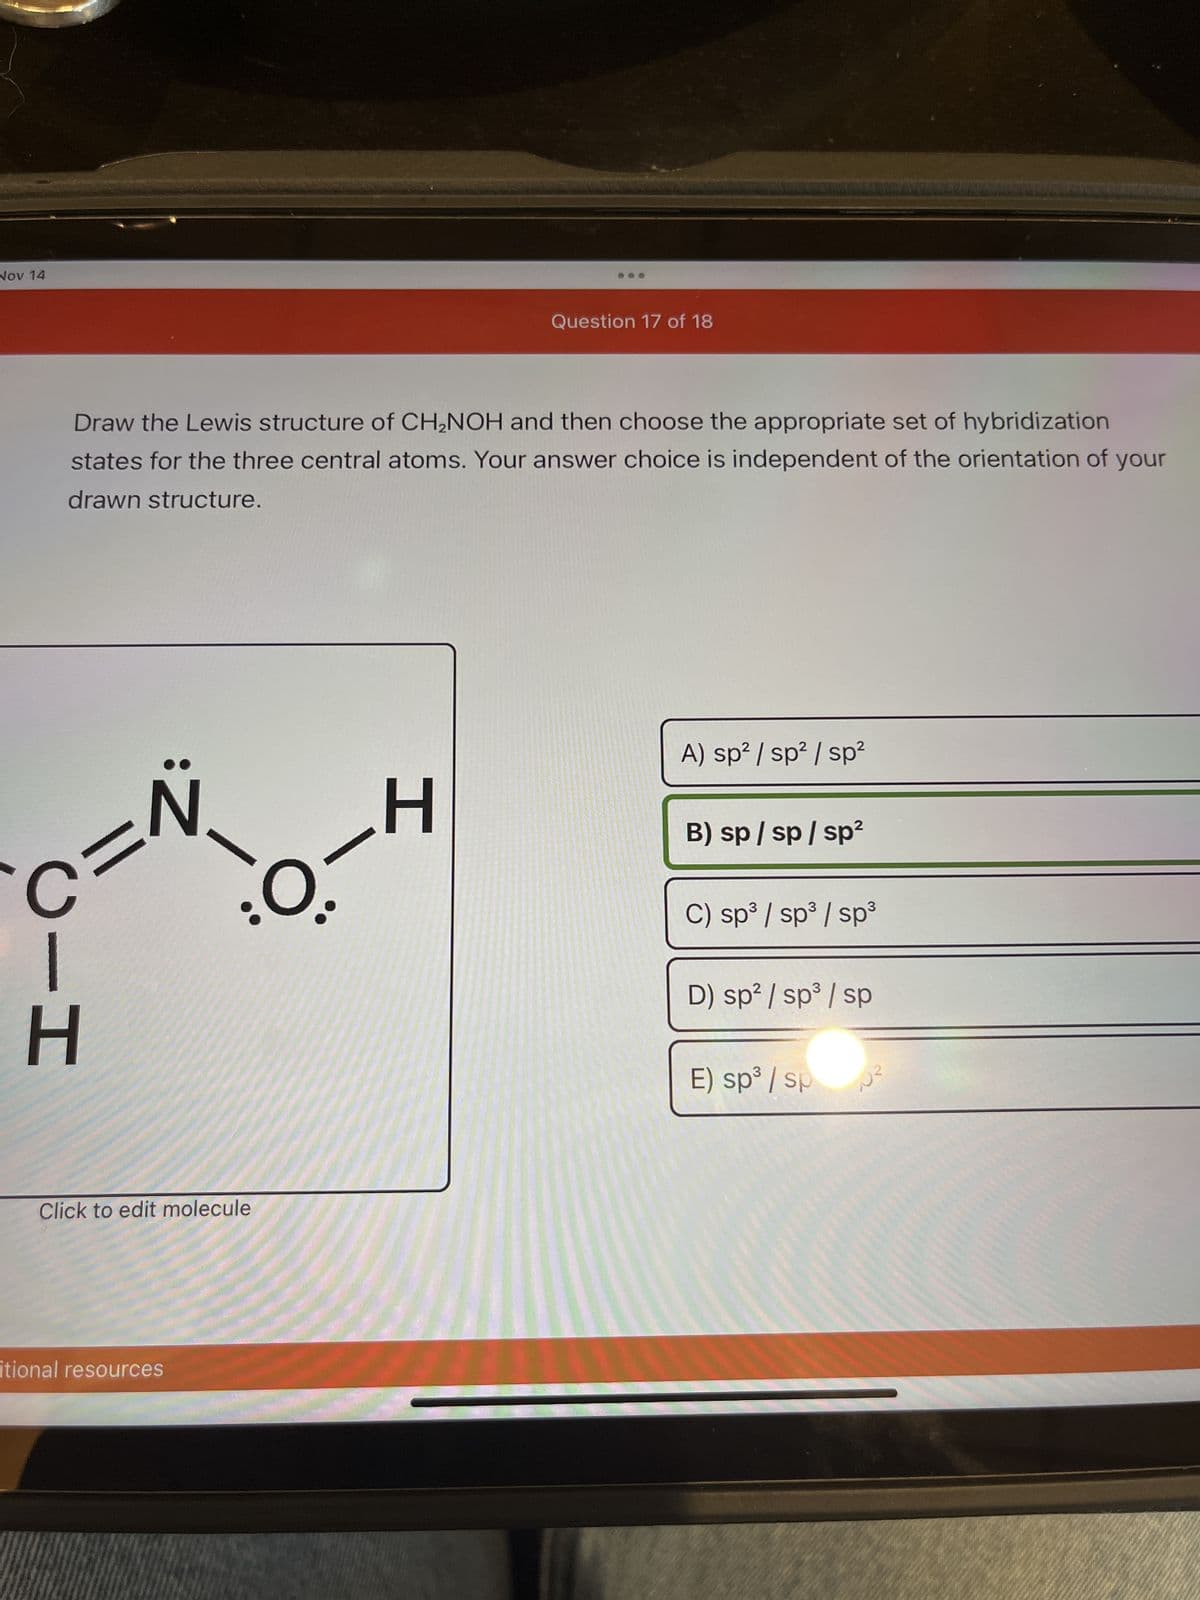 Nov 14
Draw the Lewis structure of CH₂NOH and then choose the appropriate set of hybridization
states for the three central atoms. Your answer choice is independent of the orientation of your
drawn structure.
C=N
HI
-H
:O-
Click to edit molecule
itional resources
Question 17 of 18
A) sp² / sp² / sp²
B) sp/sp/sp²
C) sp³ / sp³ / sp³
D) sp² / sp³ / sp
E) sp³ / sp
5²